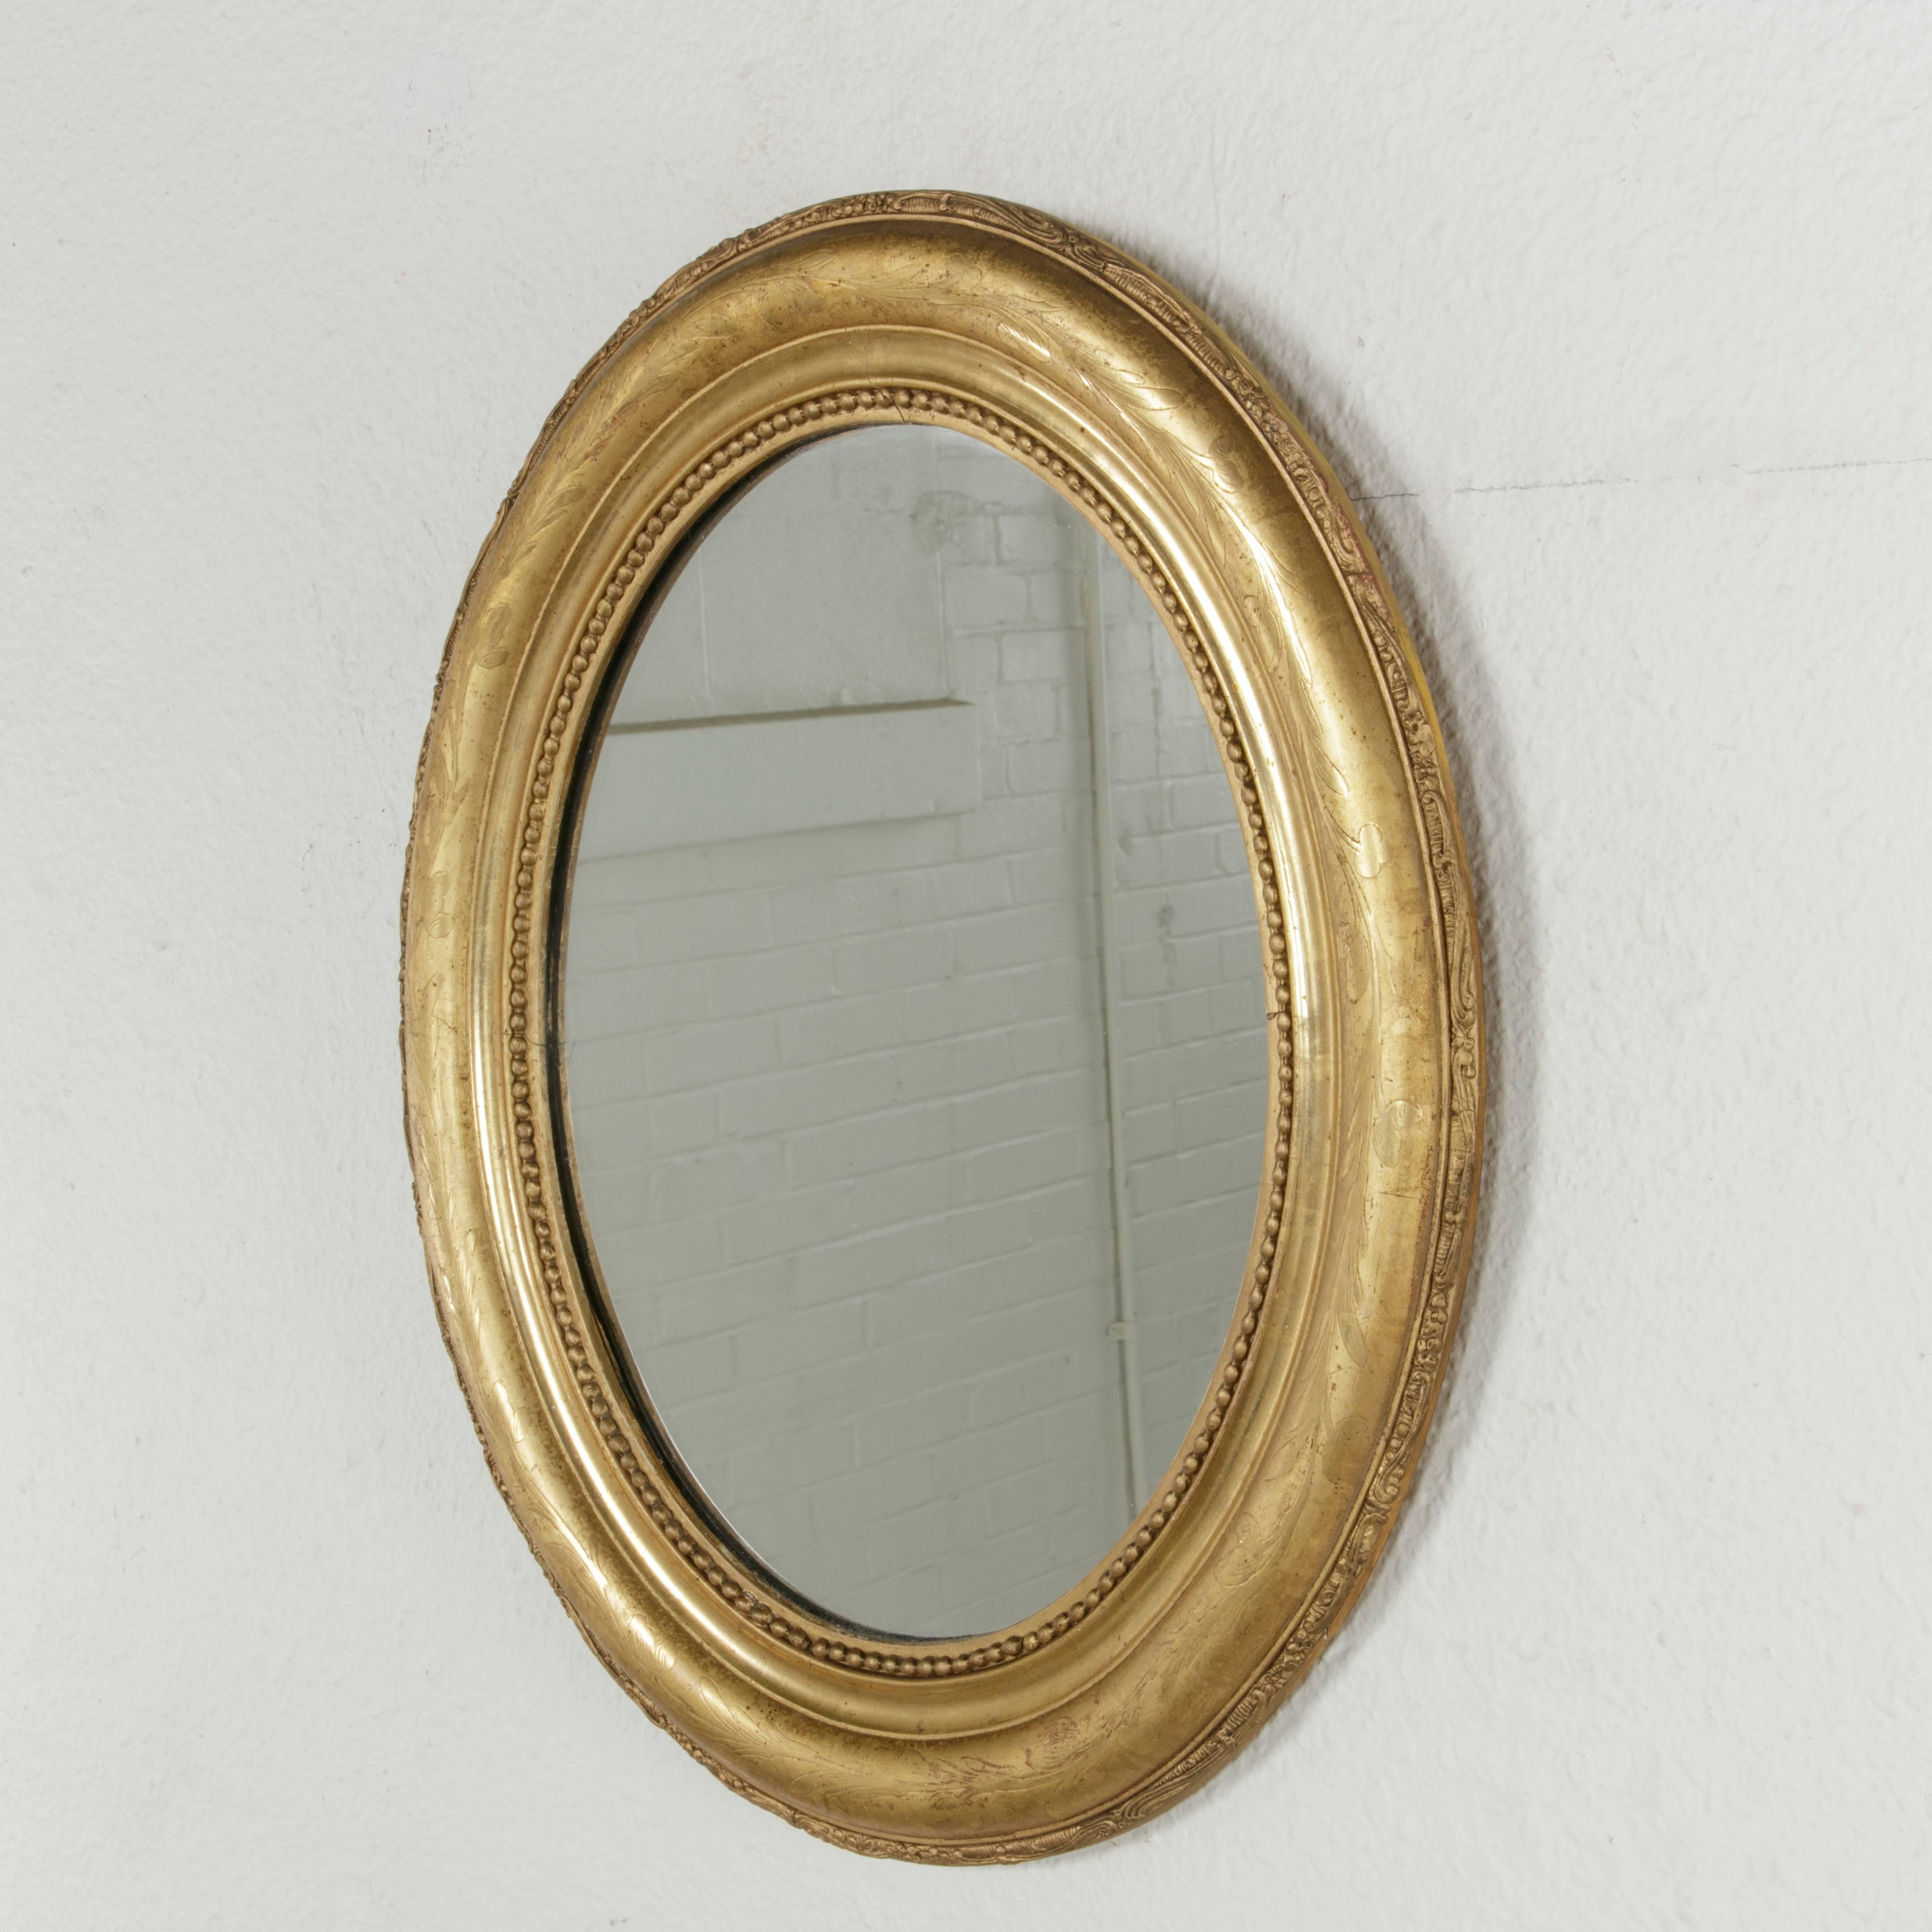 Small-Scale 19th Century French Oval Giltwood Mirror Napoleon III Period 4